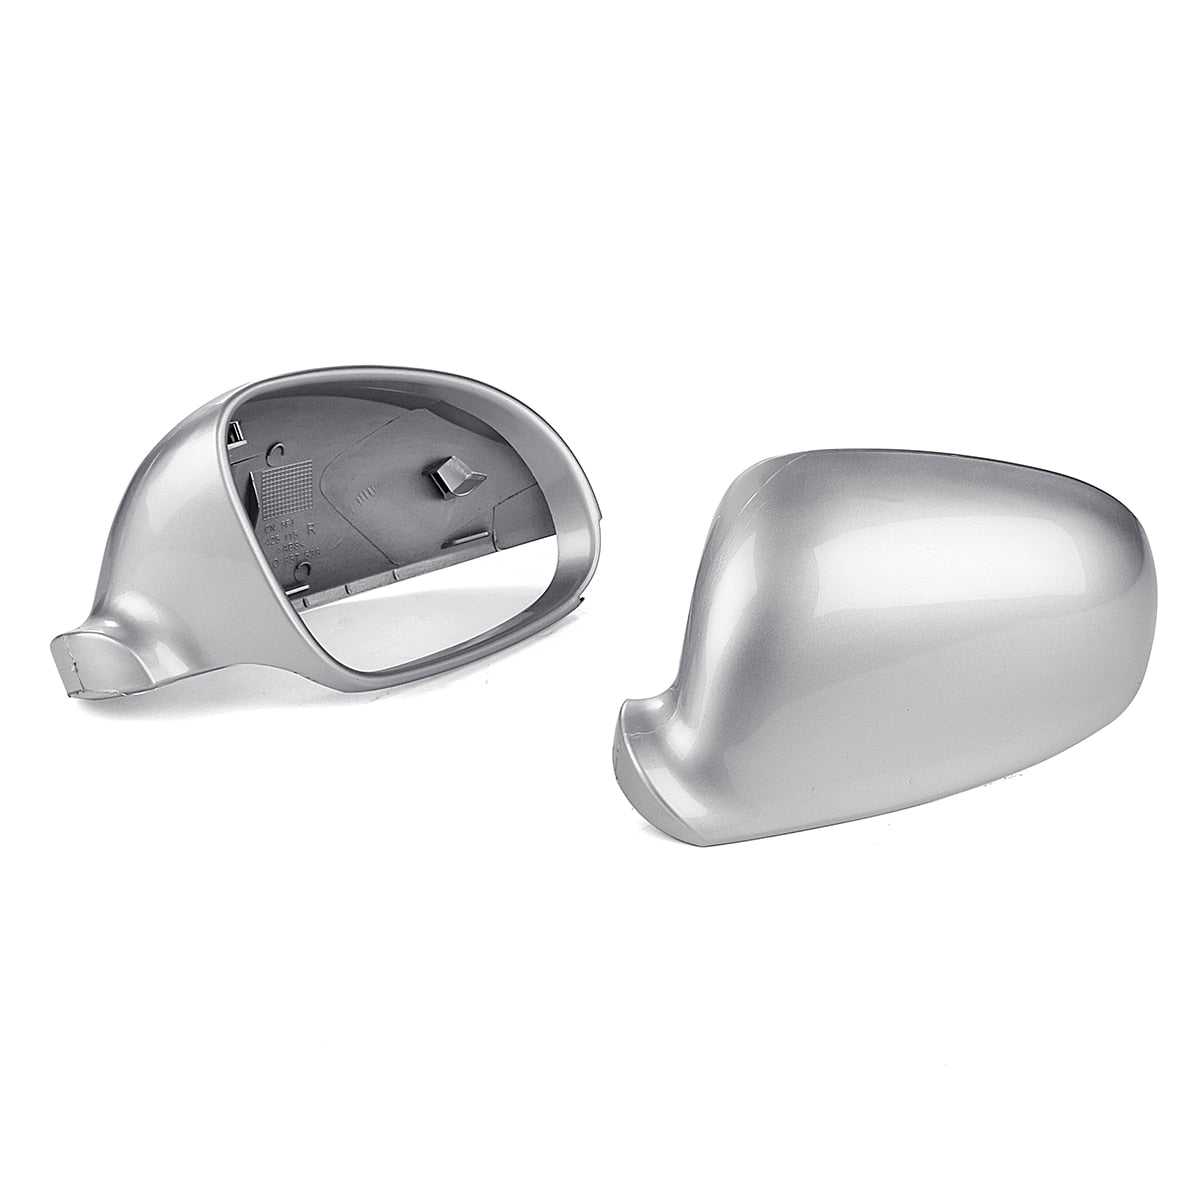 (LEFT) Rearview Side Wing Mirror Cover Silver Suit For VW Golf Jetta MK5 2003 - 2009